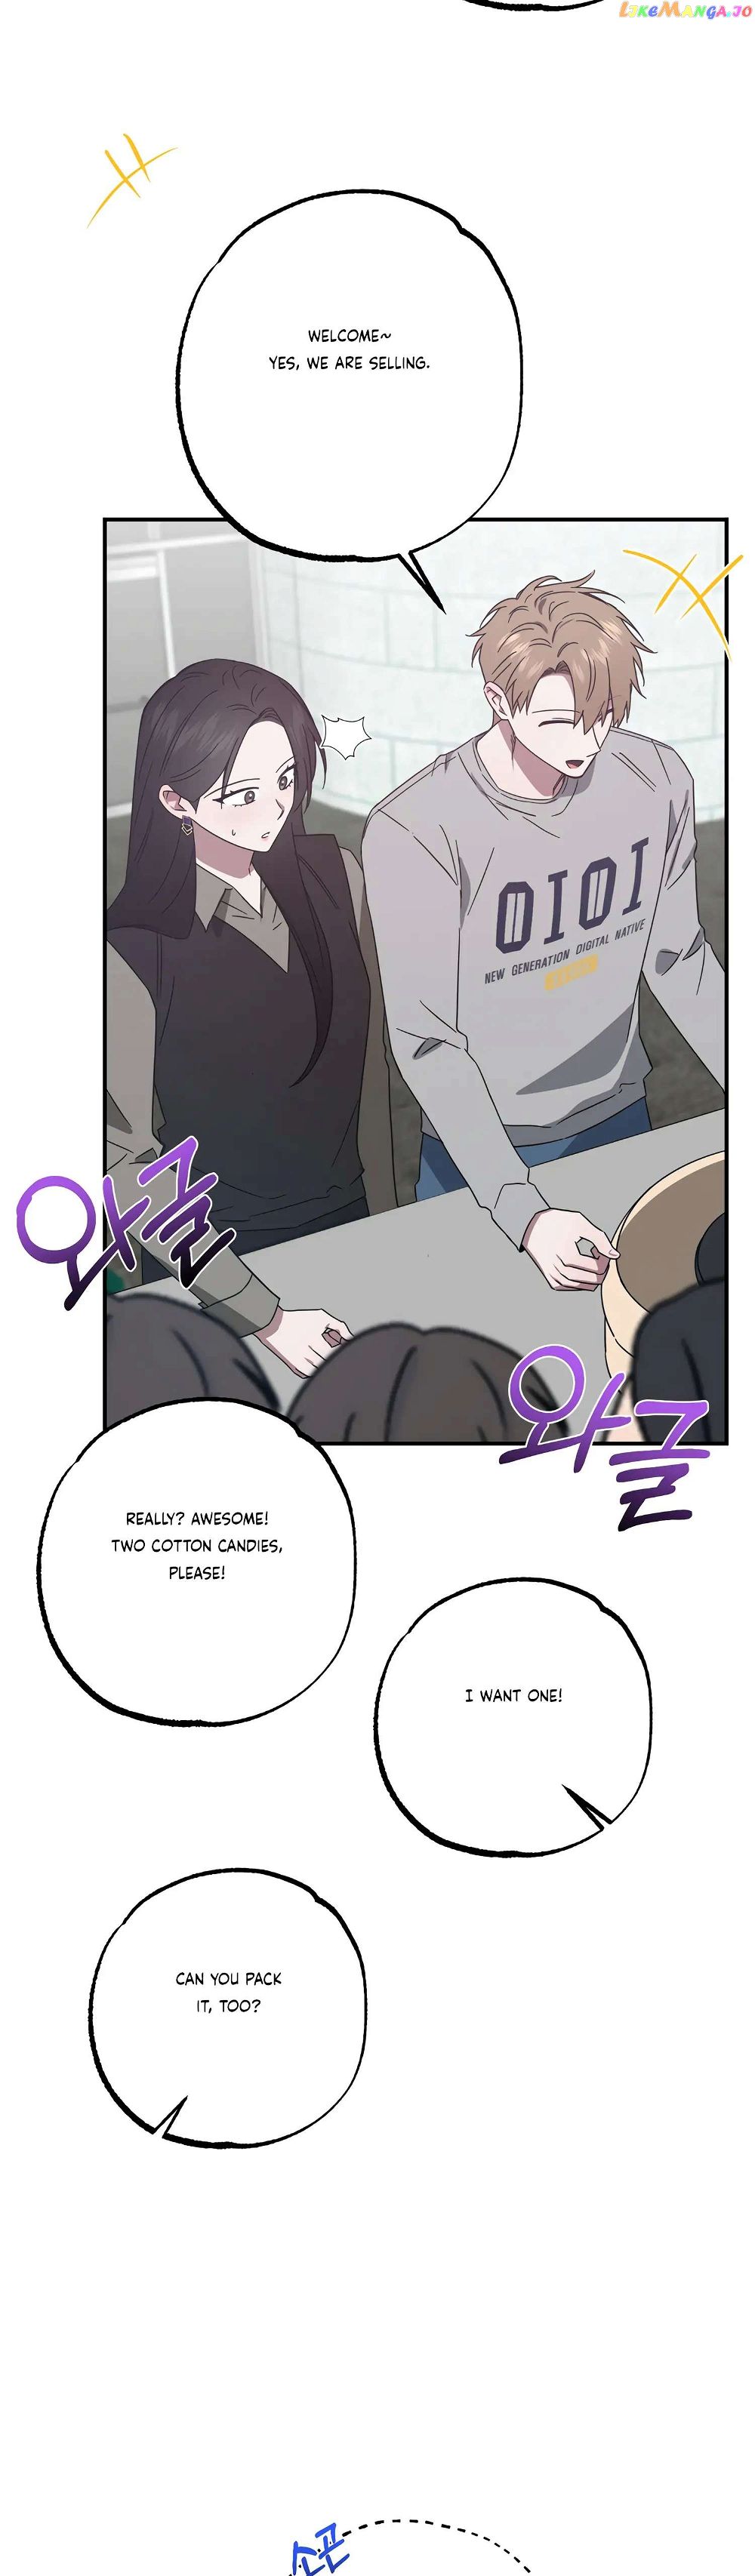 Mijeong’s Relationships chapter 38 - Page 15